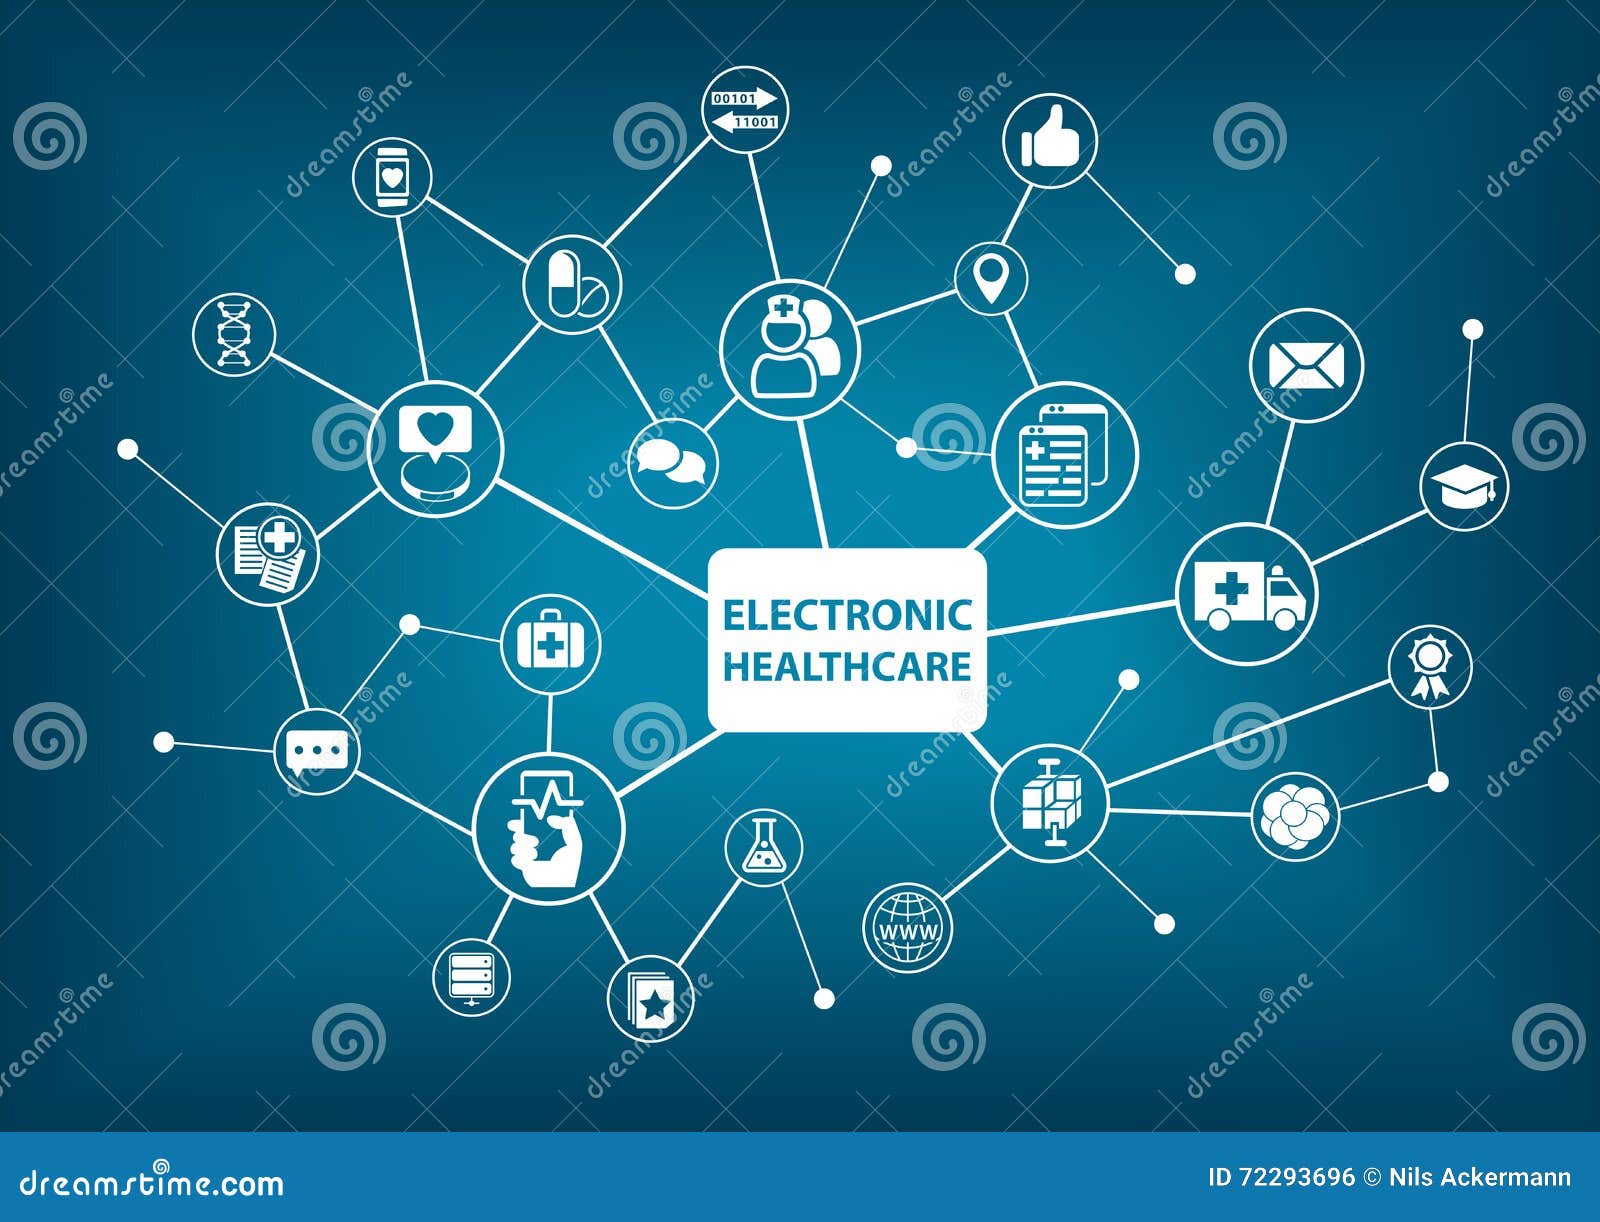 electronic healthcare background as  in a digitized hospital